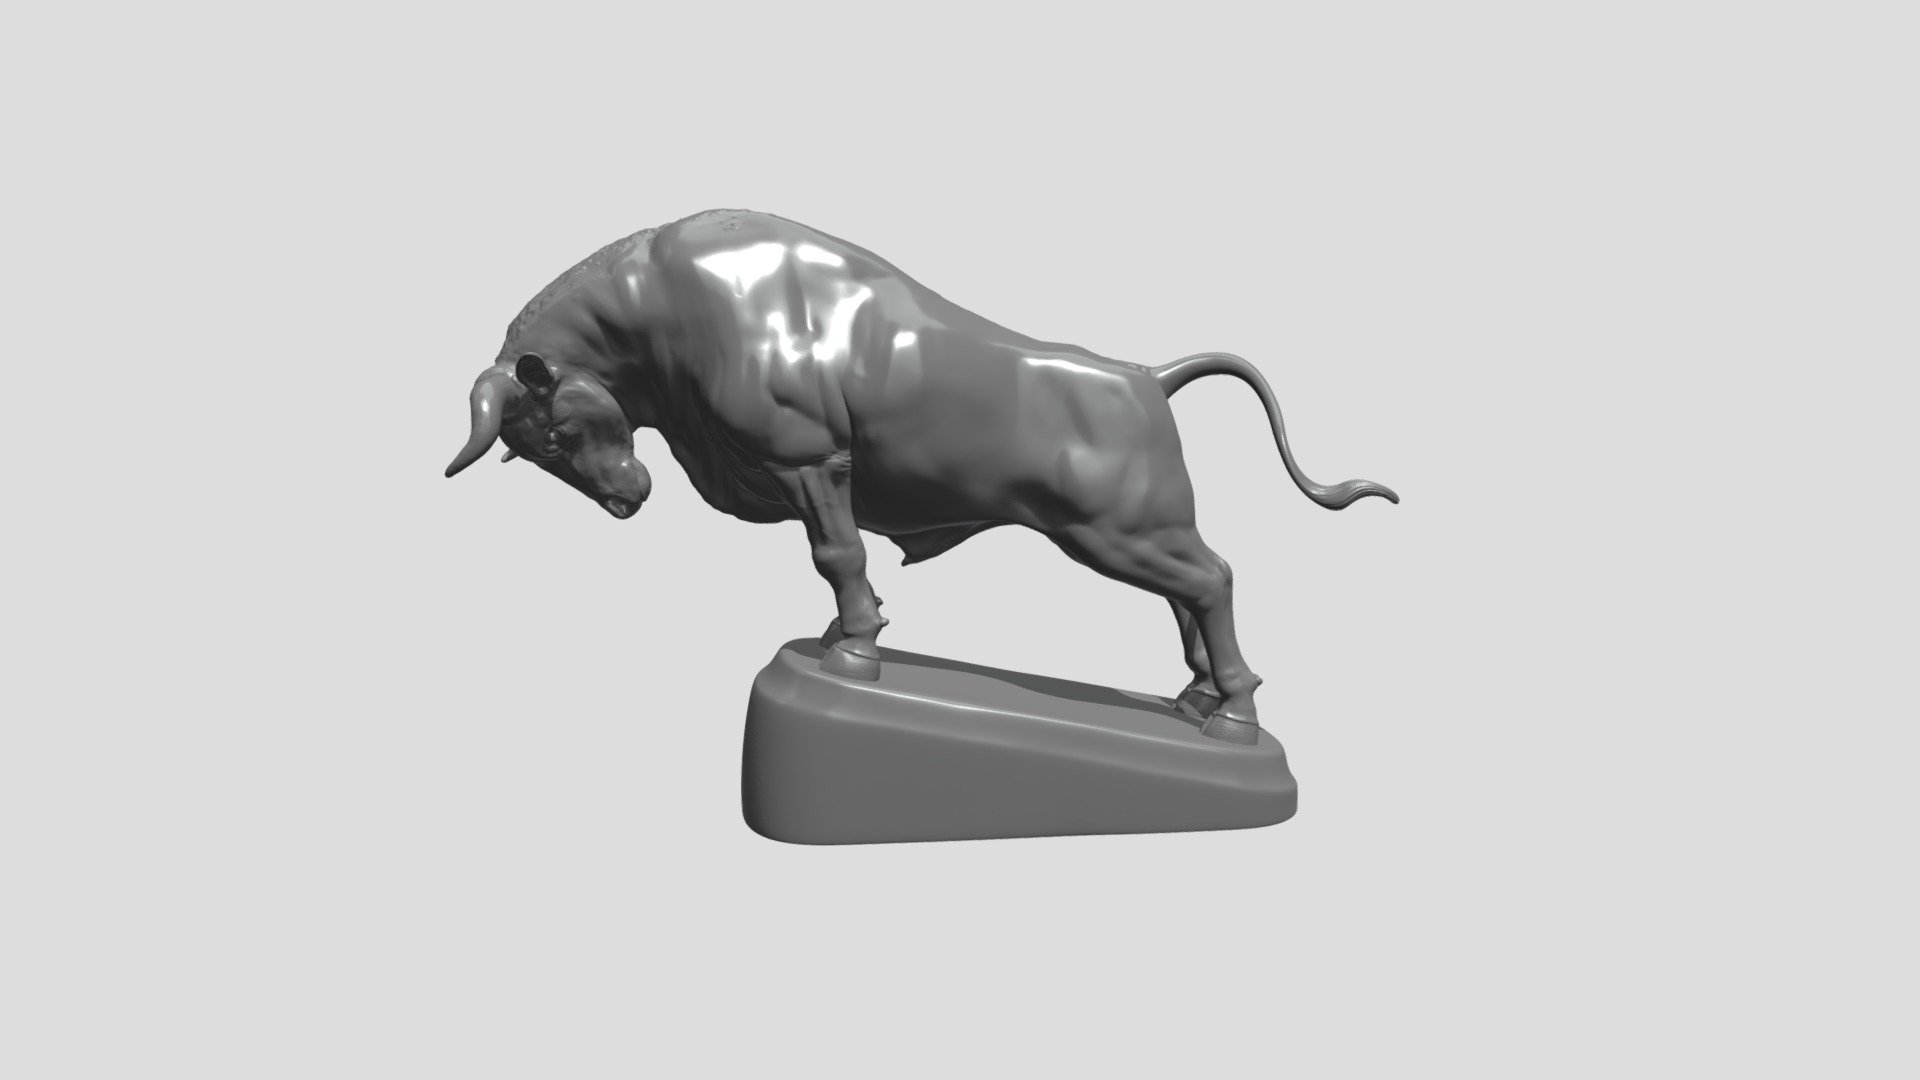 Bull High Poly, sculpted in ZBrush 2020. Maybe used for Jewelry design, interiour design, digital visualisation, for the production of illustrations. Default size - 15 cm tall (you can scale it up or down). Ideal for printing 3D

2 Part 3D Printing

Compositions

Board Game

Decoration

Motion graphics - Destruction of solids

Etc....

Does not contain UVs Maps

Piece with 15 cm

Files :

FBX

Does not contain lighting

I hope it will be useful in your project !

Thank you for visiting my models !! - Bull Fight - Buy Royalty Free 3D model by aleexstudios 3d model